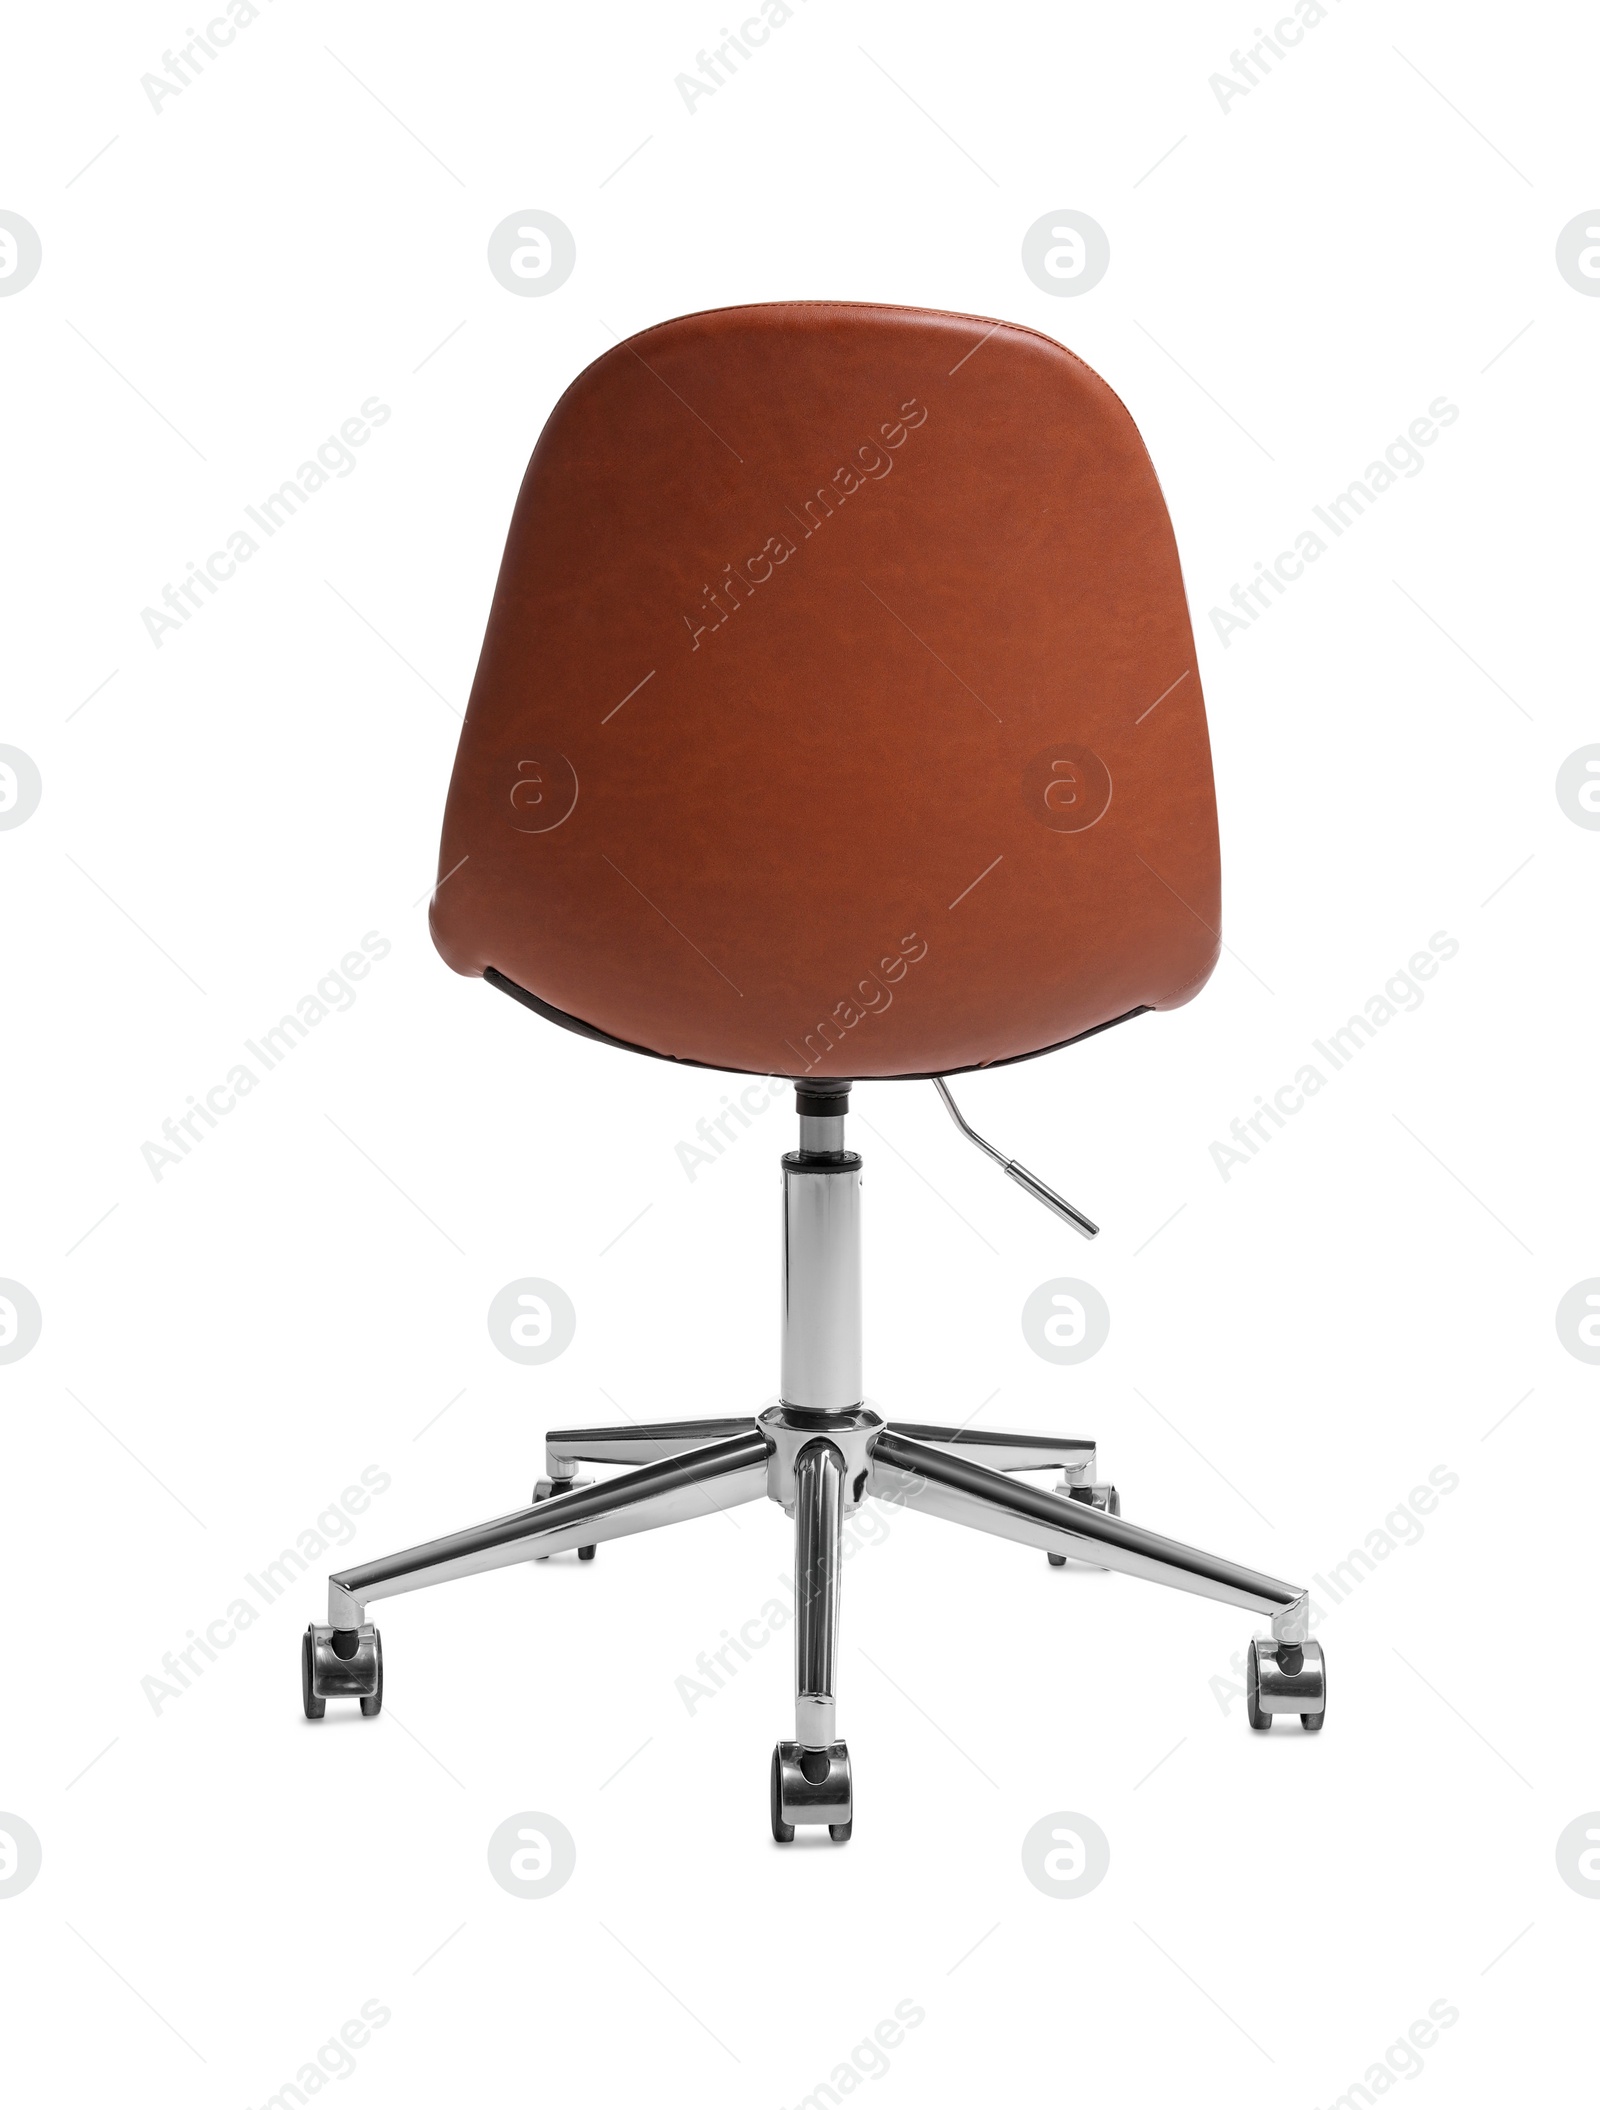 Photo of Comfortable leather office chair isolated on white, back view